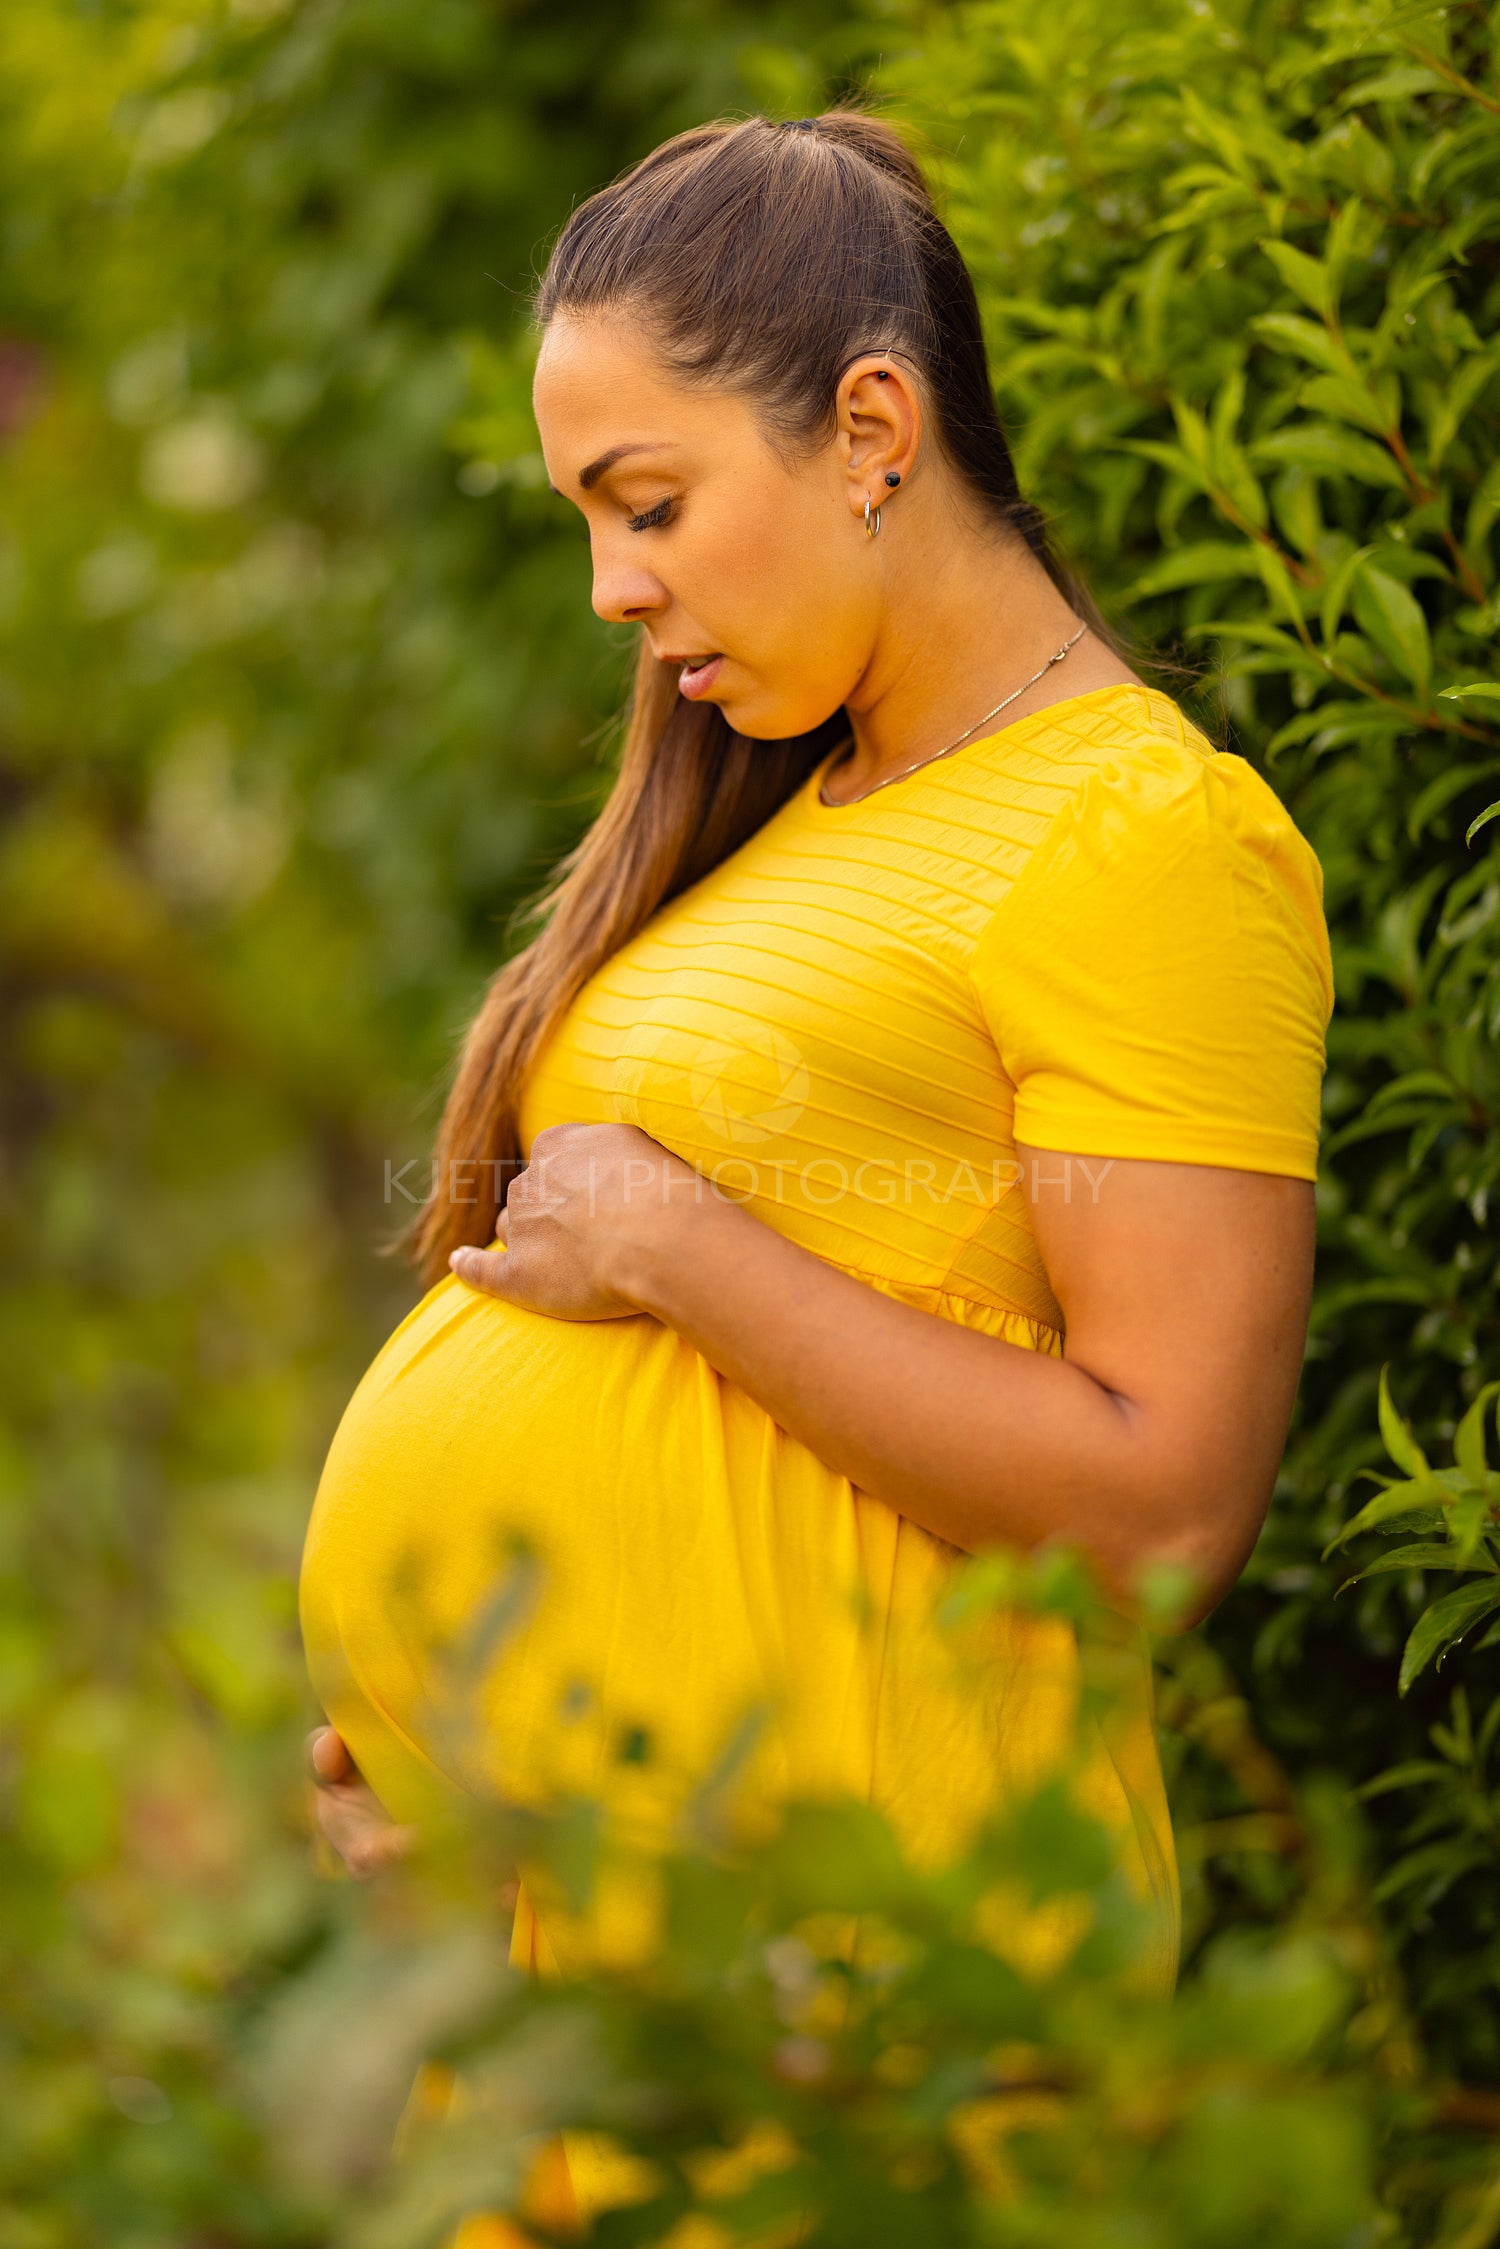 Expecting mother in sunny garden wearing yellow dress